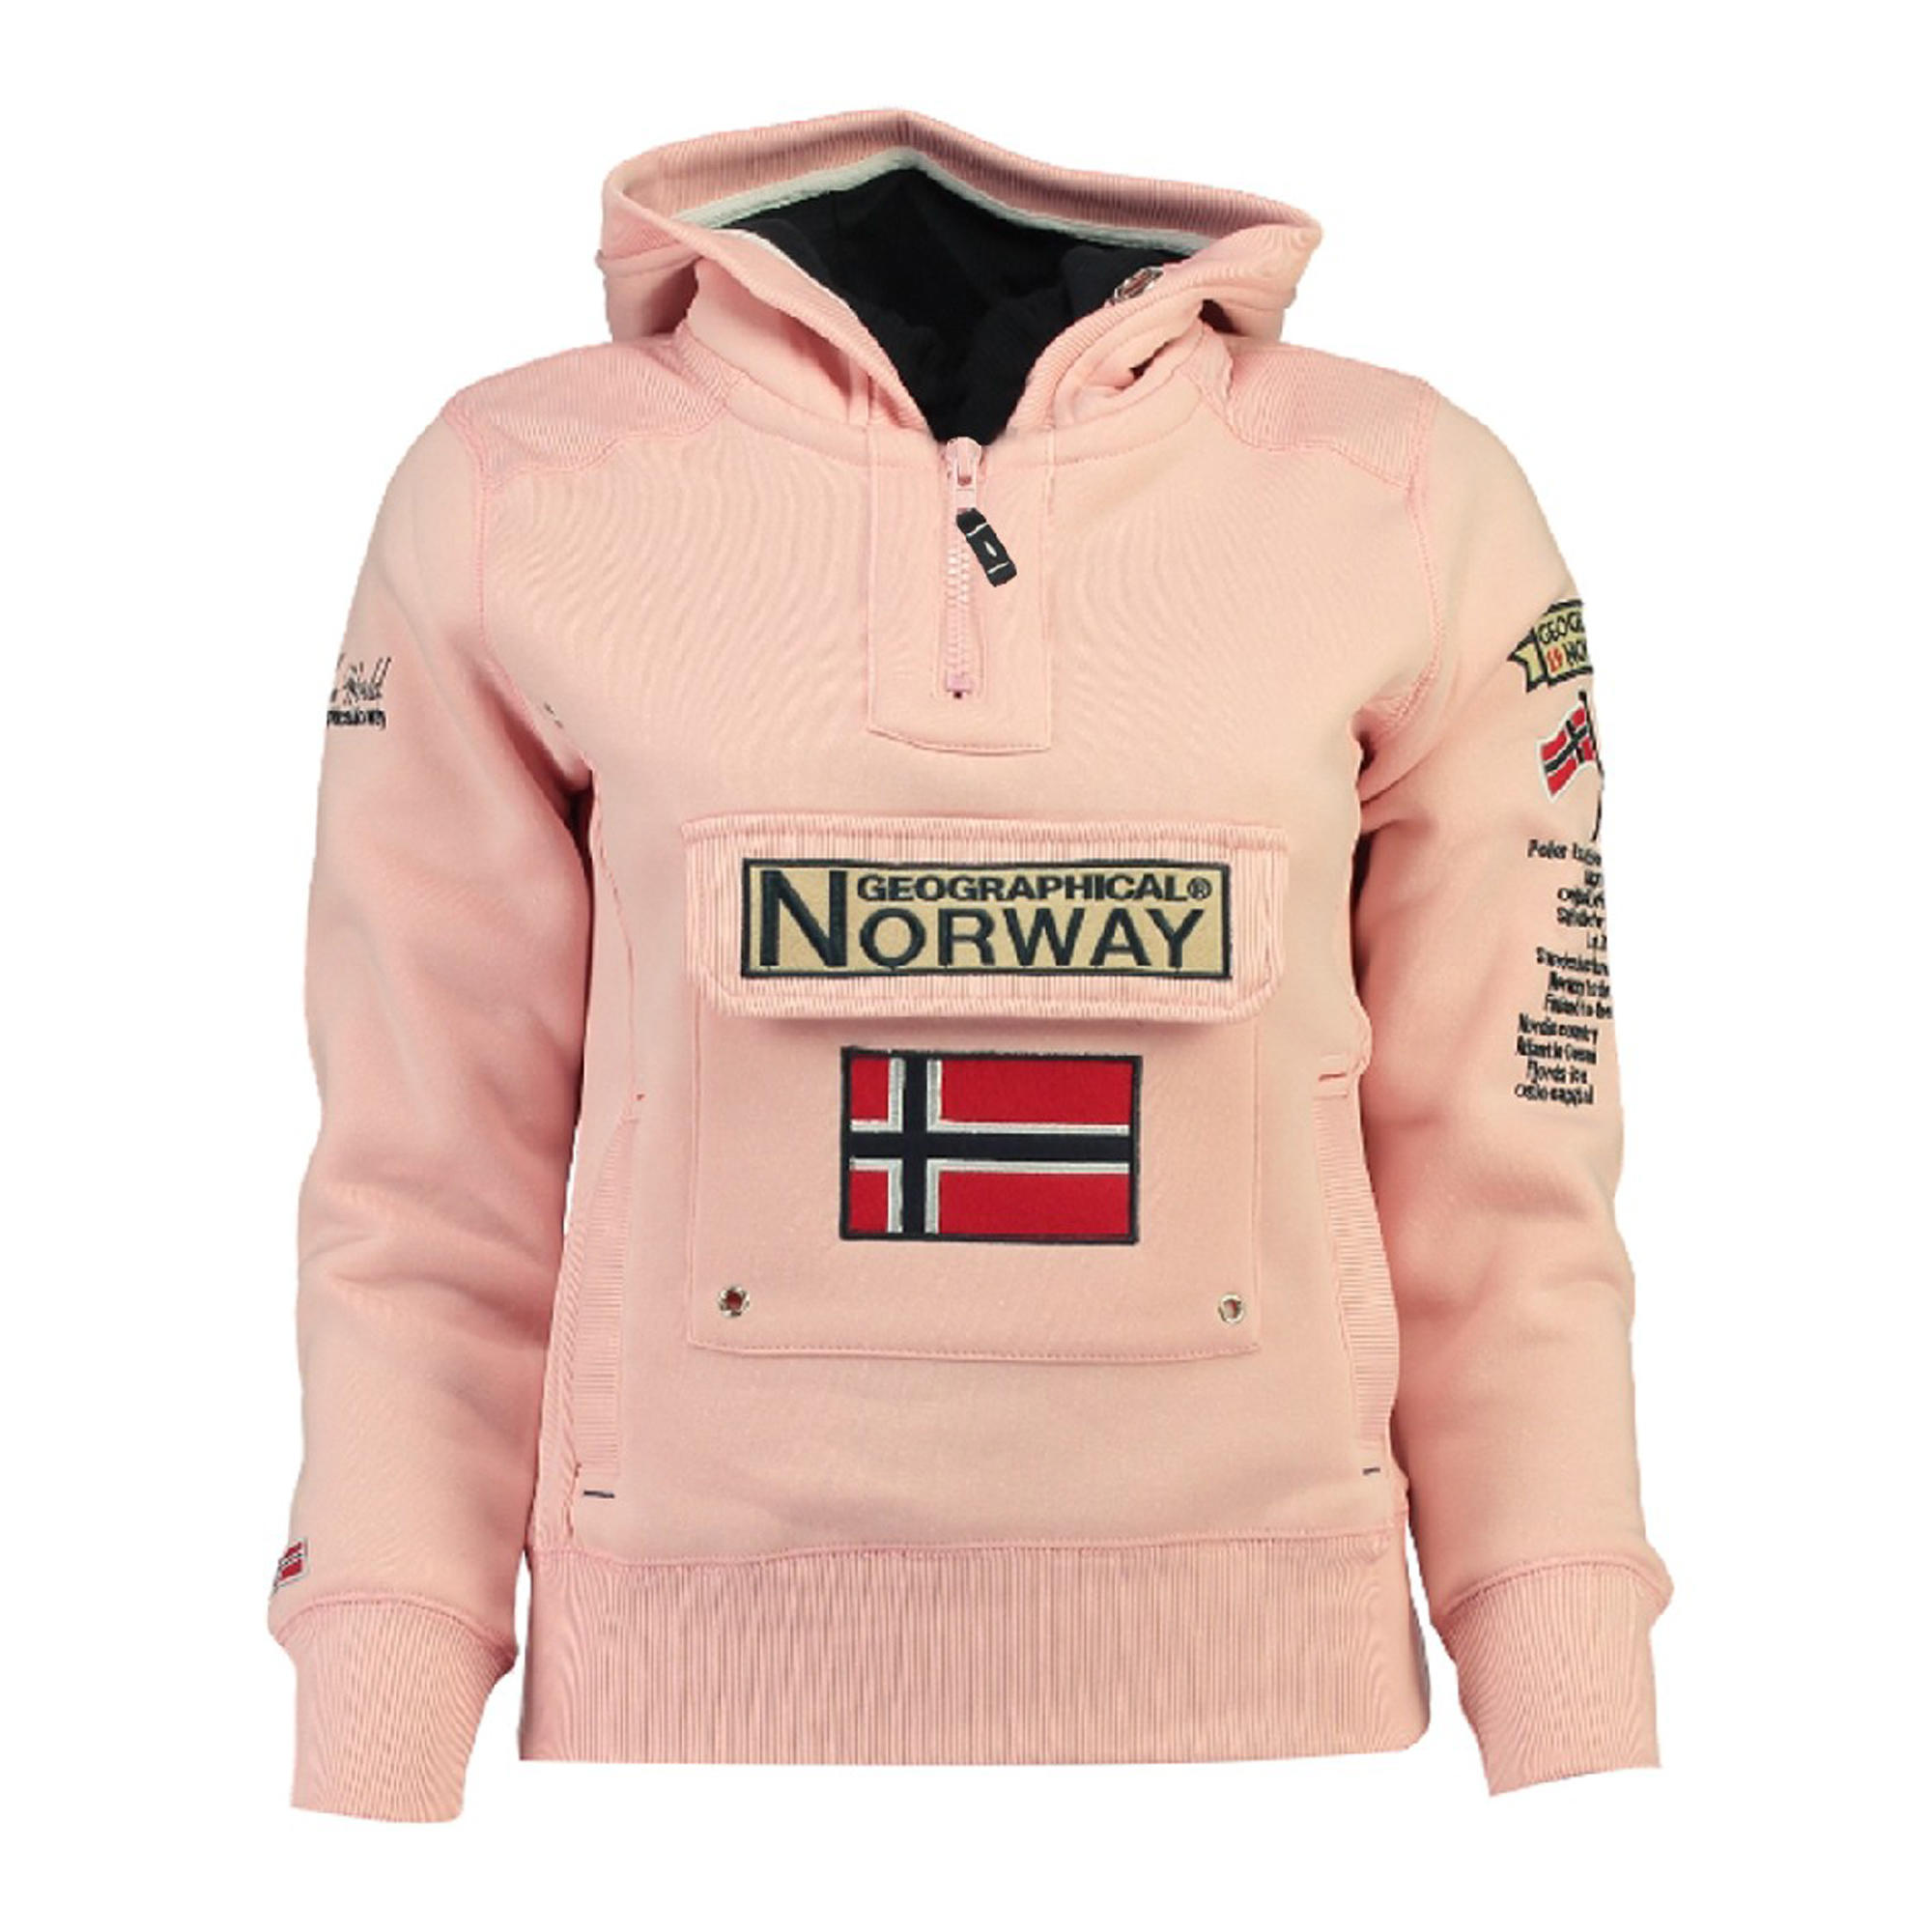 Geographical Norway | Decathlon